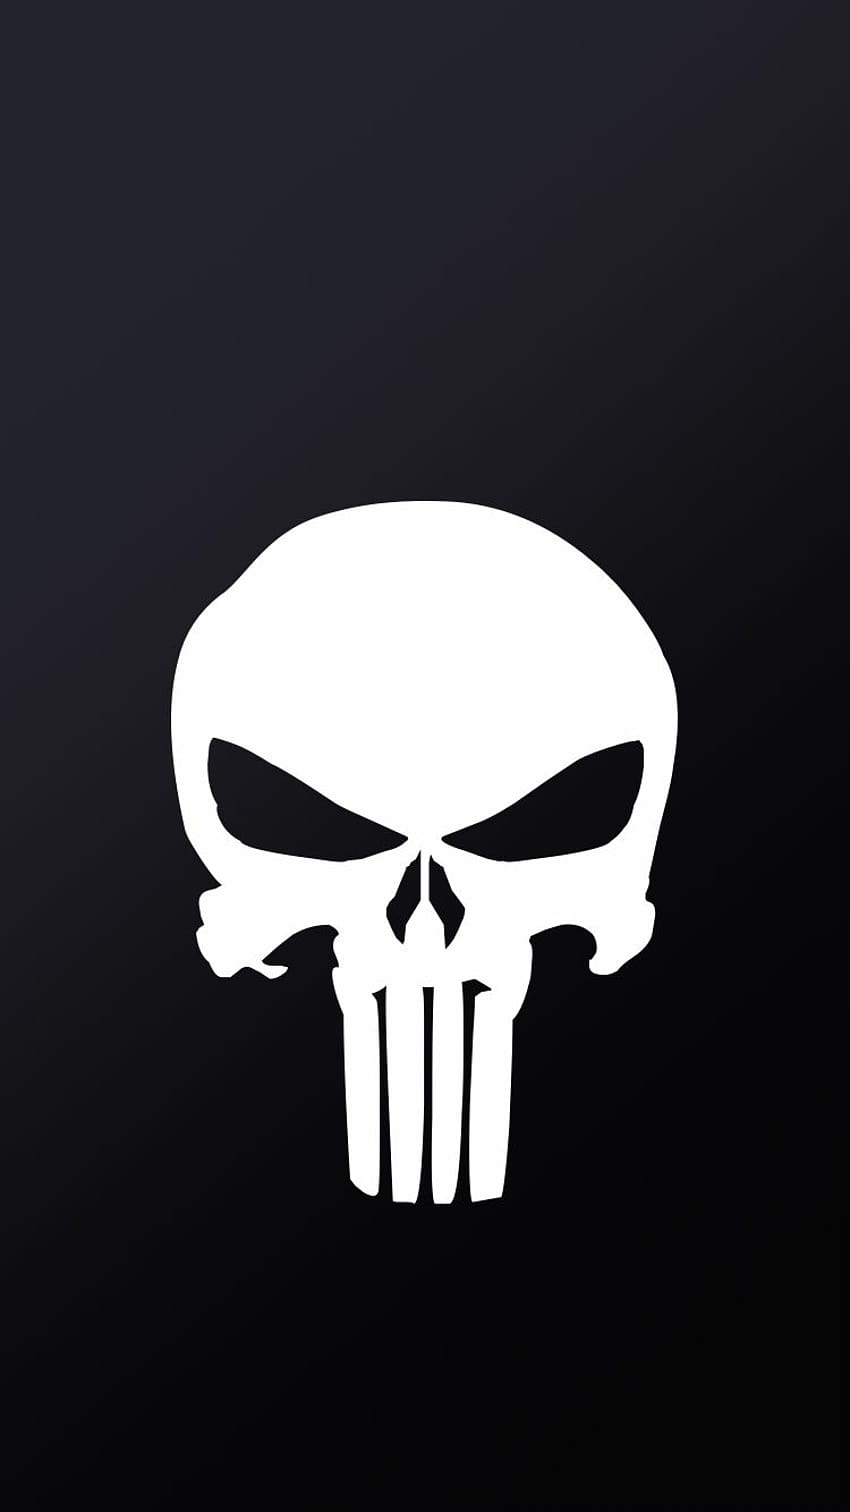 Best The Punisher War Zone For Mobile and iPhone in ~ Loader, punisher characters HD phone wallpaper